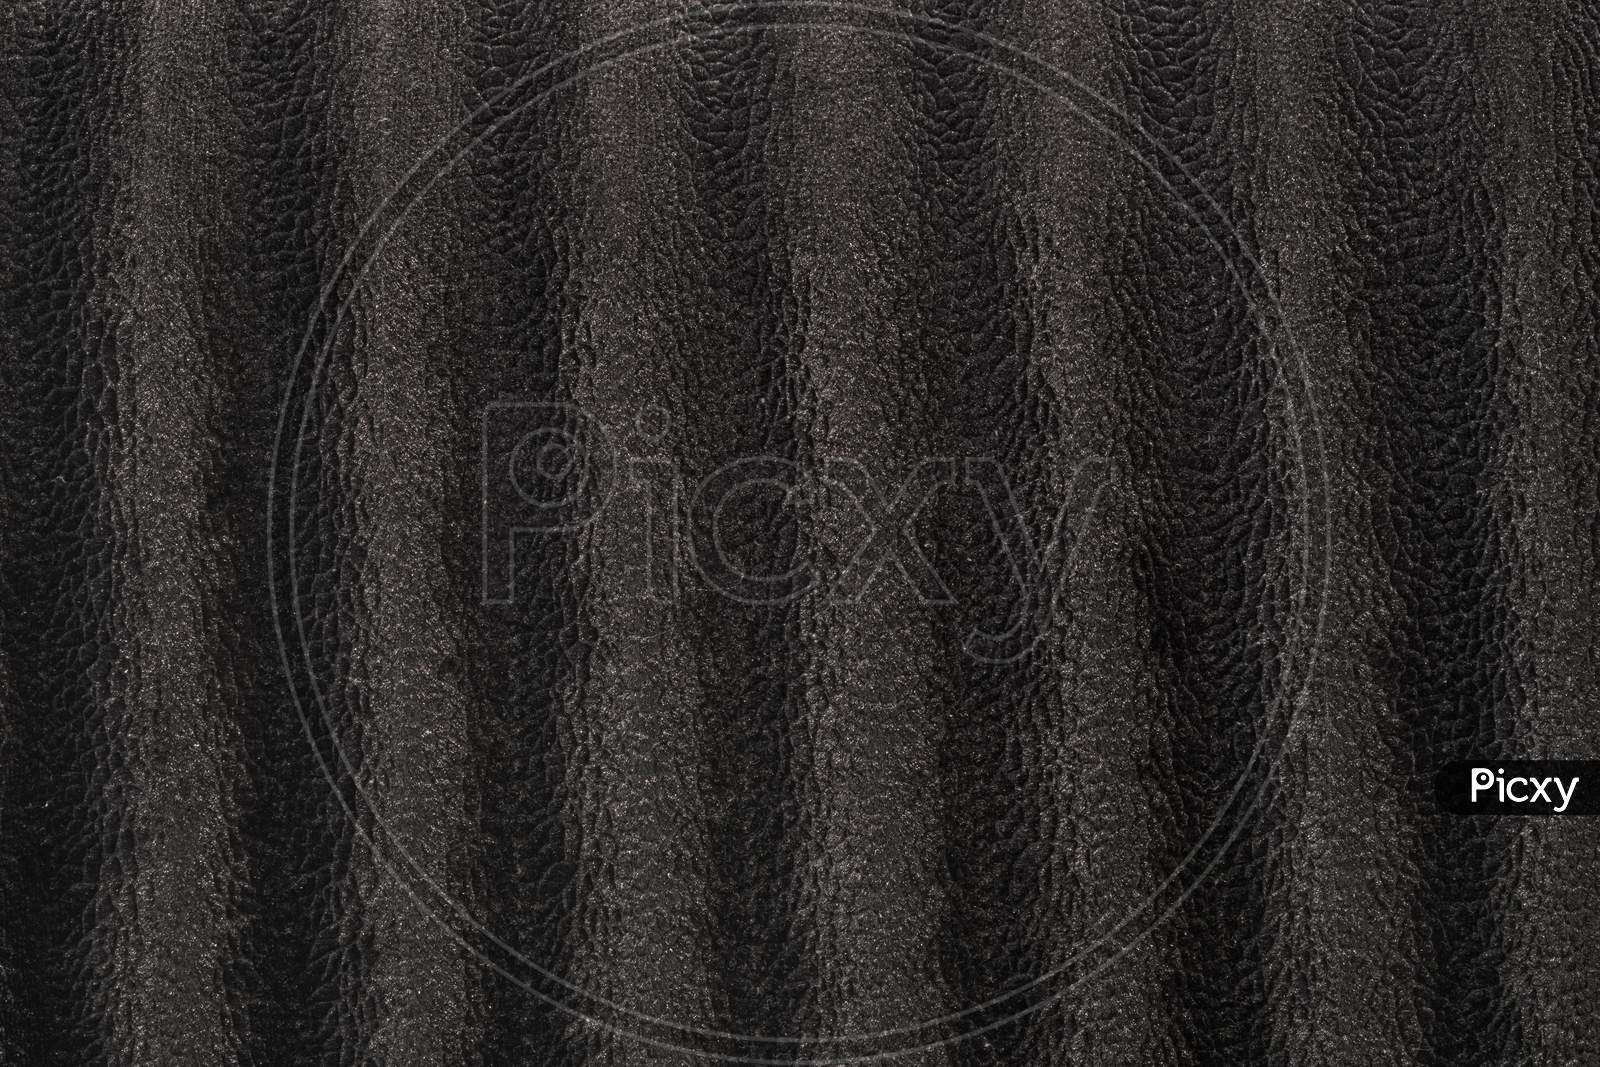 Highly Detailed Texture Of Black Velour Cloth With Animal Skin Patterns